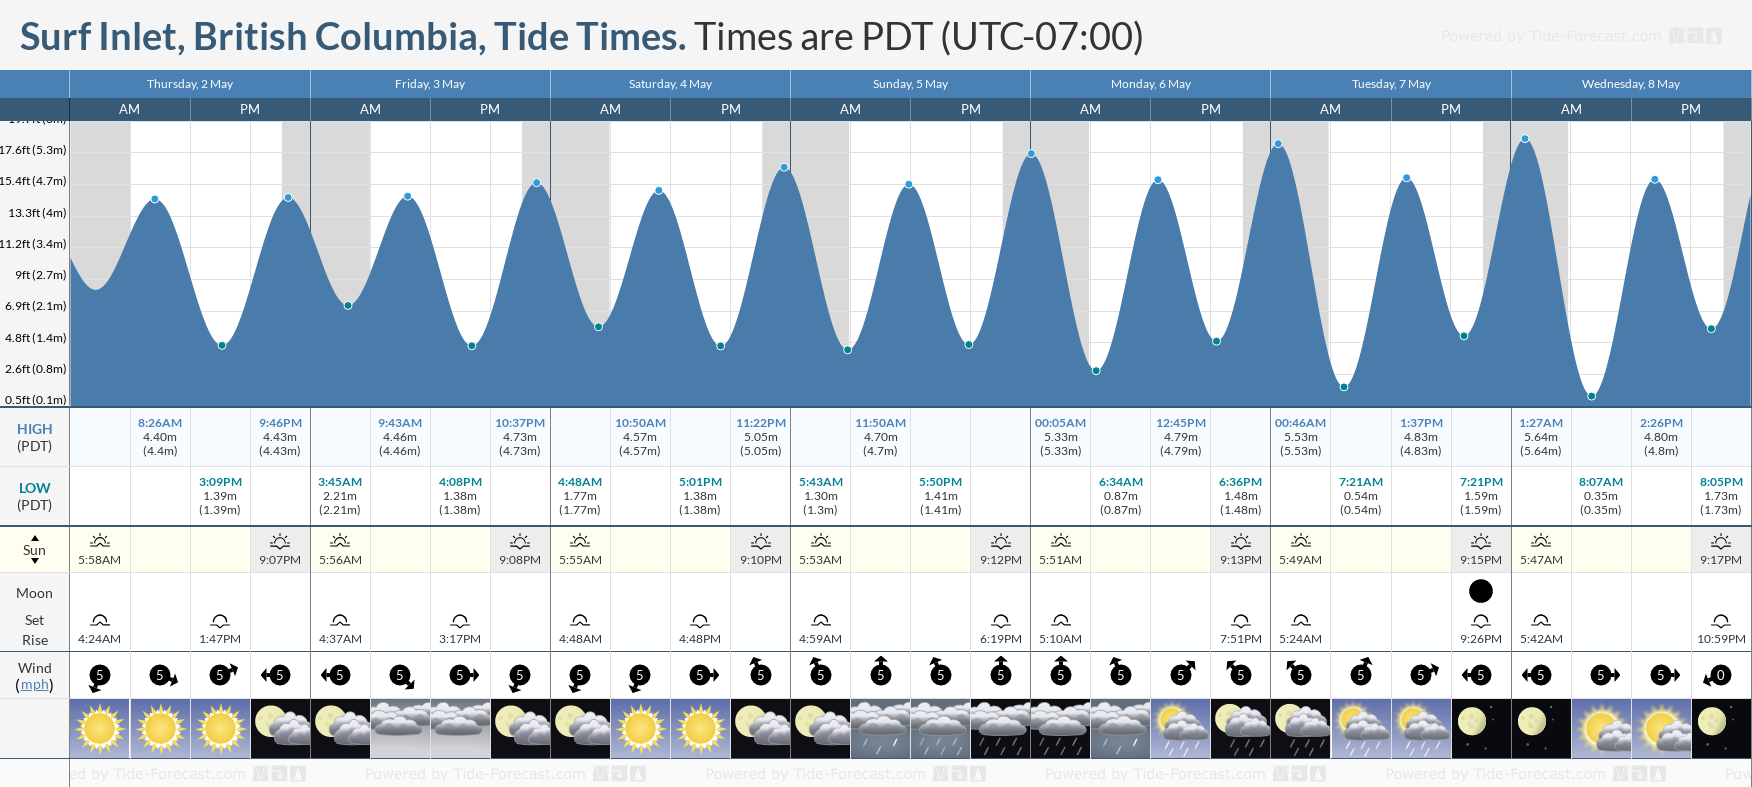 Surf Inlet, British Columbia Tide Chart including high and low tide tide times for the next 7 days